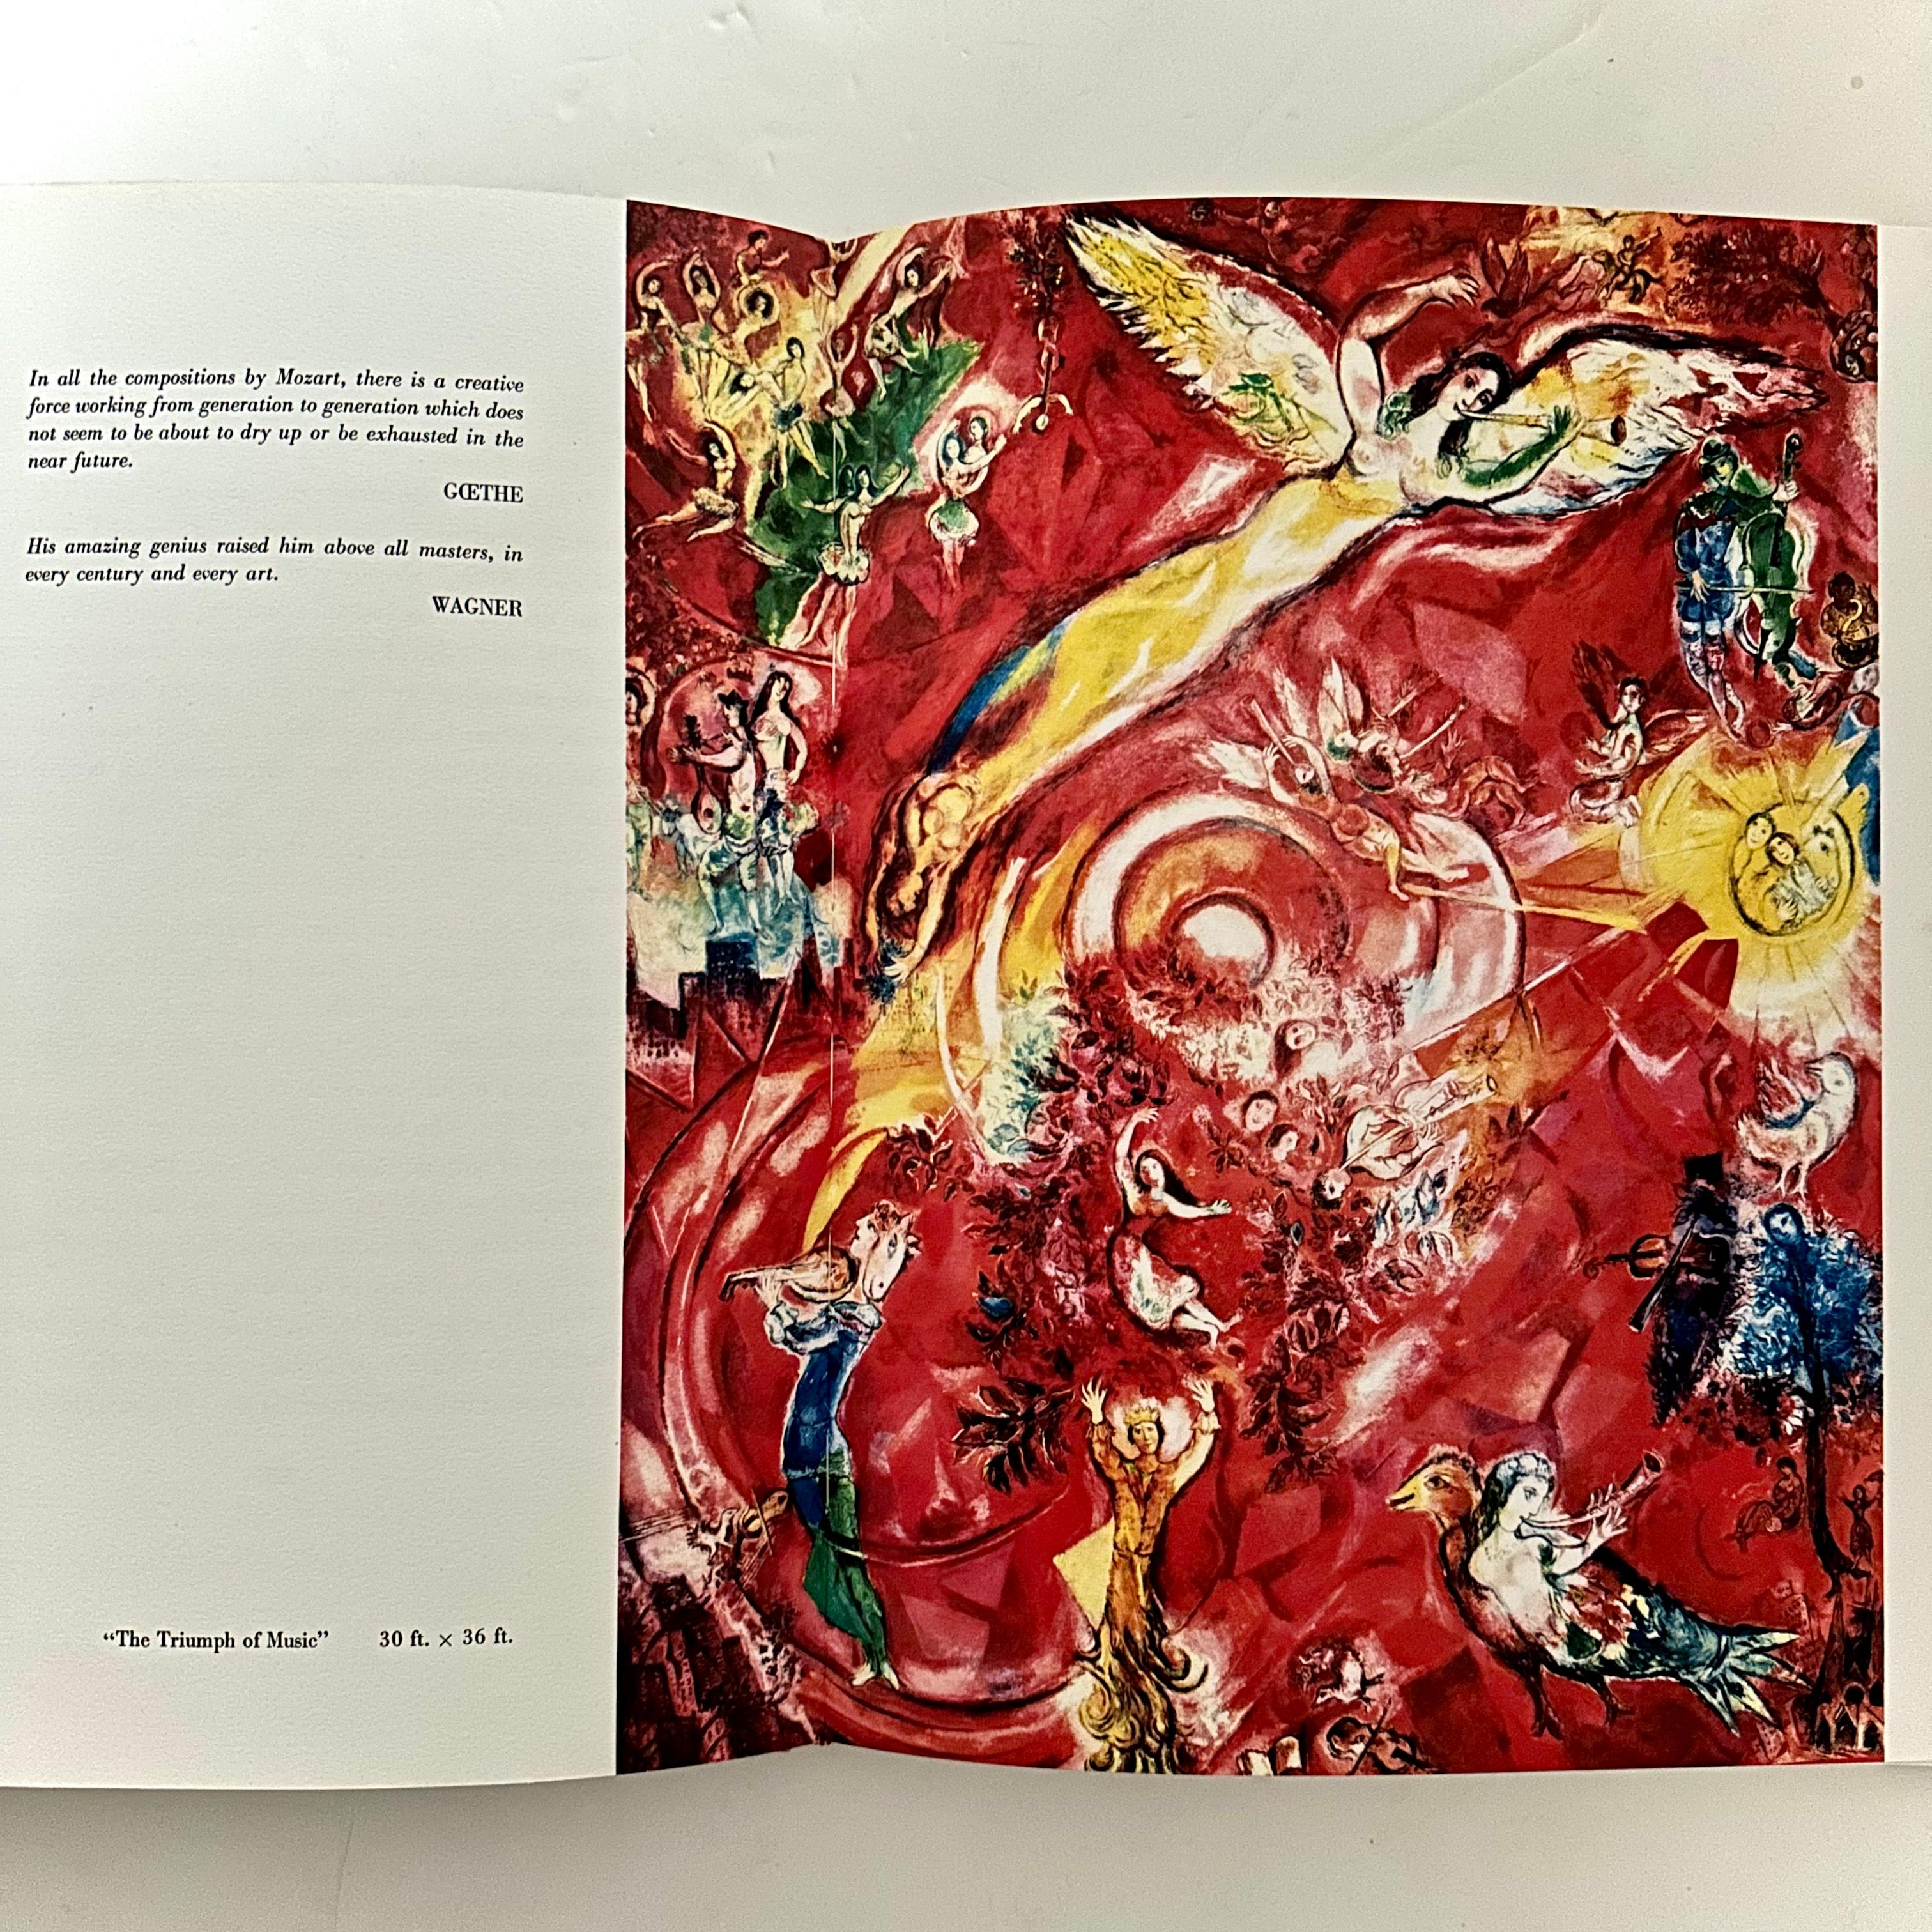 Published by the Tudor Publishing Company, 1st edition, New York, 1971. Hardback with English text. 

Illustrated with fifty-two full-page colour reproductions, this volume showcases Chagall’s murals dedicated to the Mozart Opera piece - “The Magic